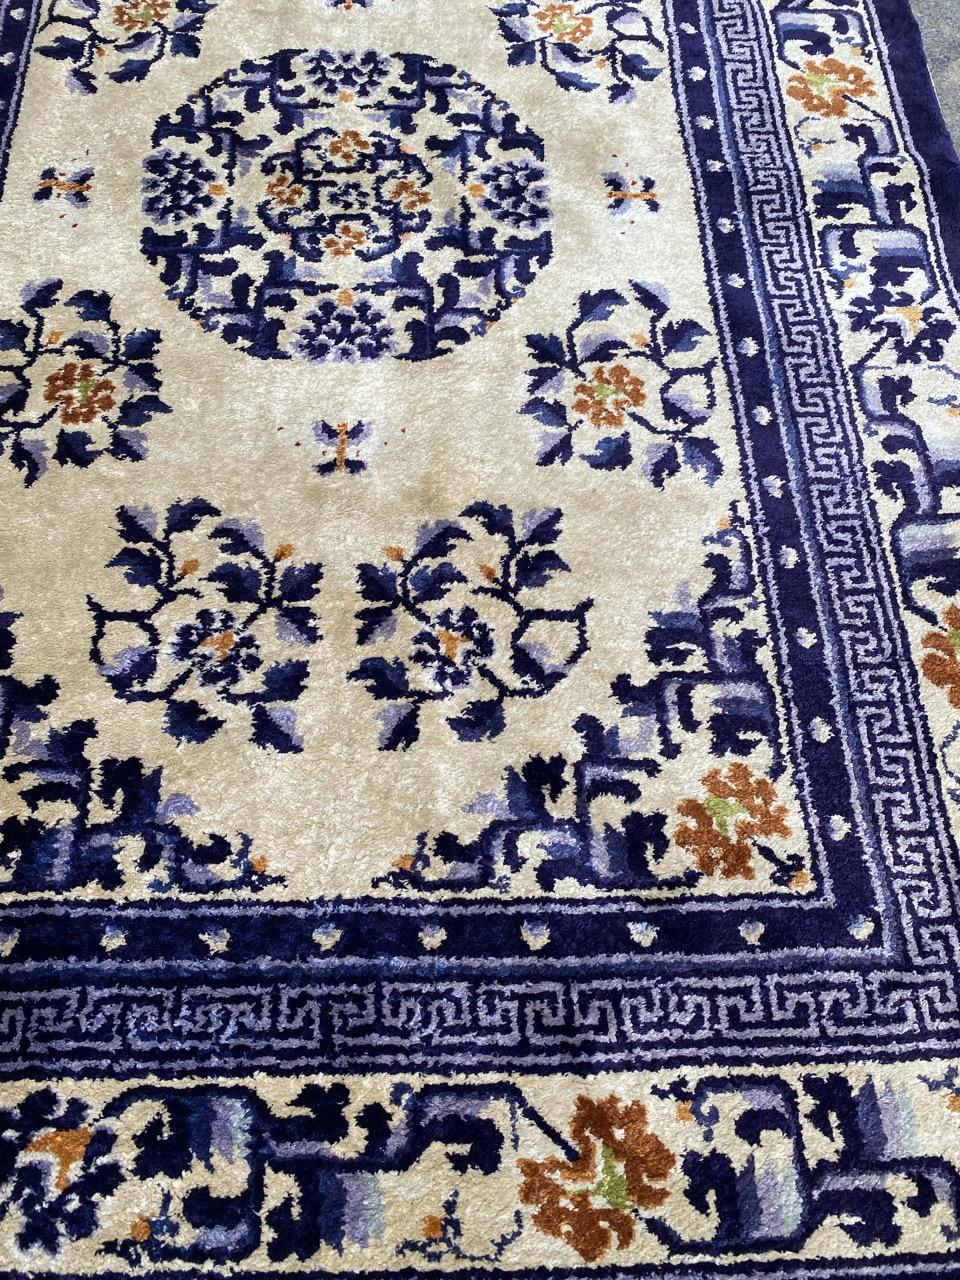 Discover the elegance of this exquisite mid-century Chinese Beijing rug featuring a stunning Chinese design in vibrant blue, brown, and touches of green on a luxurious beige background. Expertly hand-knotted with silk velvet on a silk foundation,